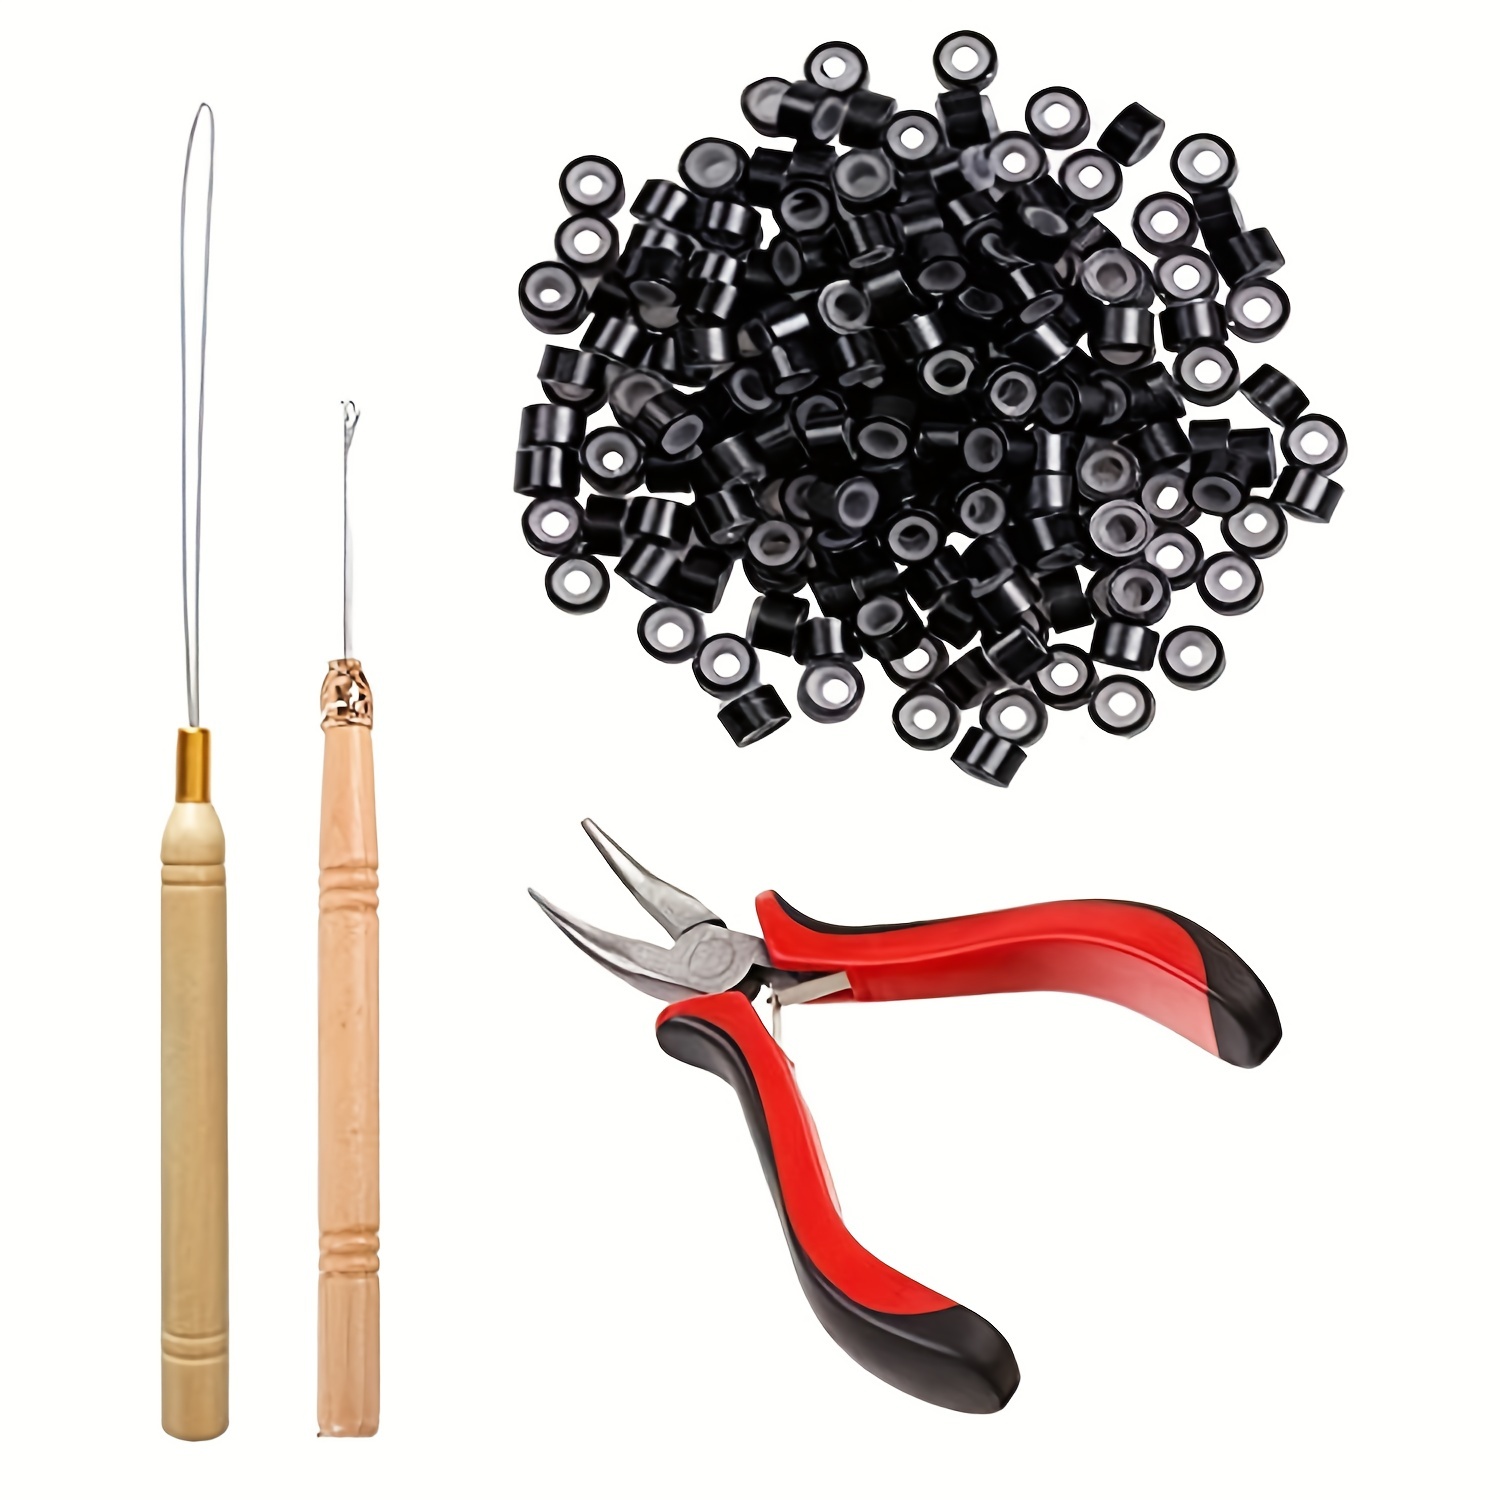 Orgrimmar Hair Extension Tool Kit Hair Extension Remove Pliers Pulling Hook 500 Pcs Micro Silicone Rings Bead Device Tool Kits for Professional Hair